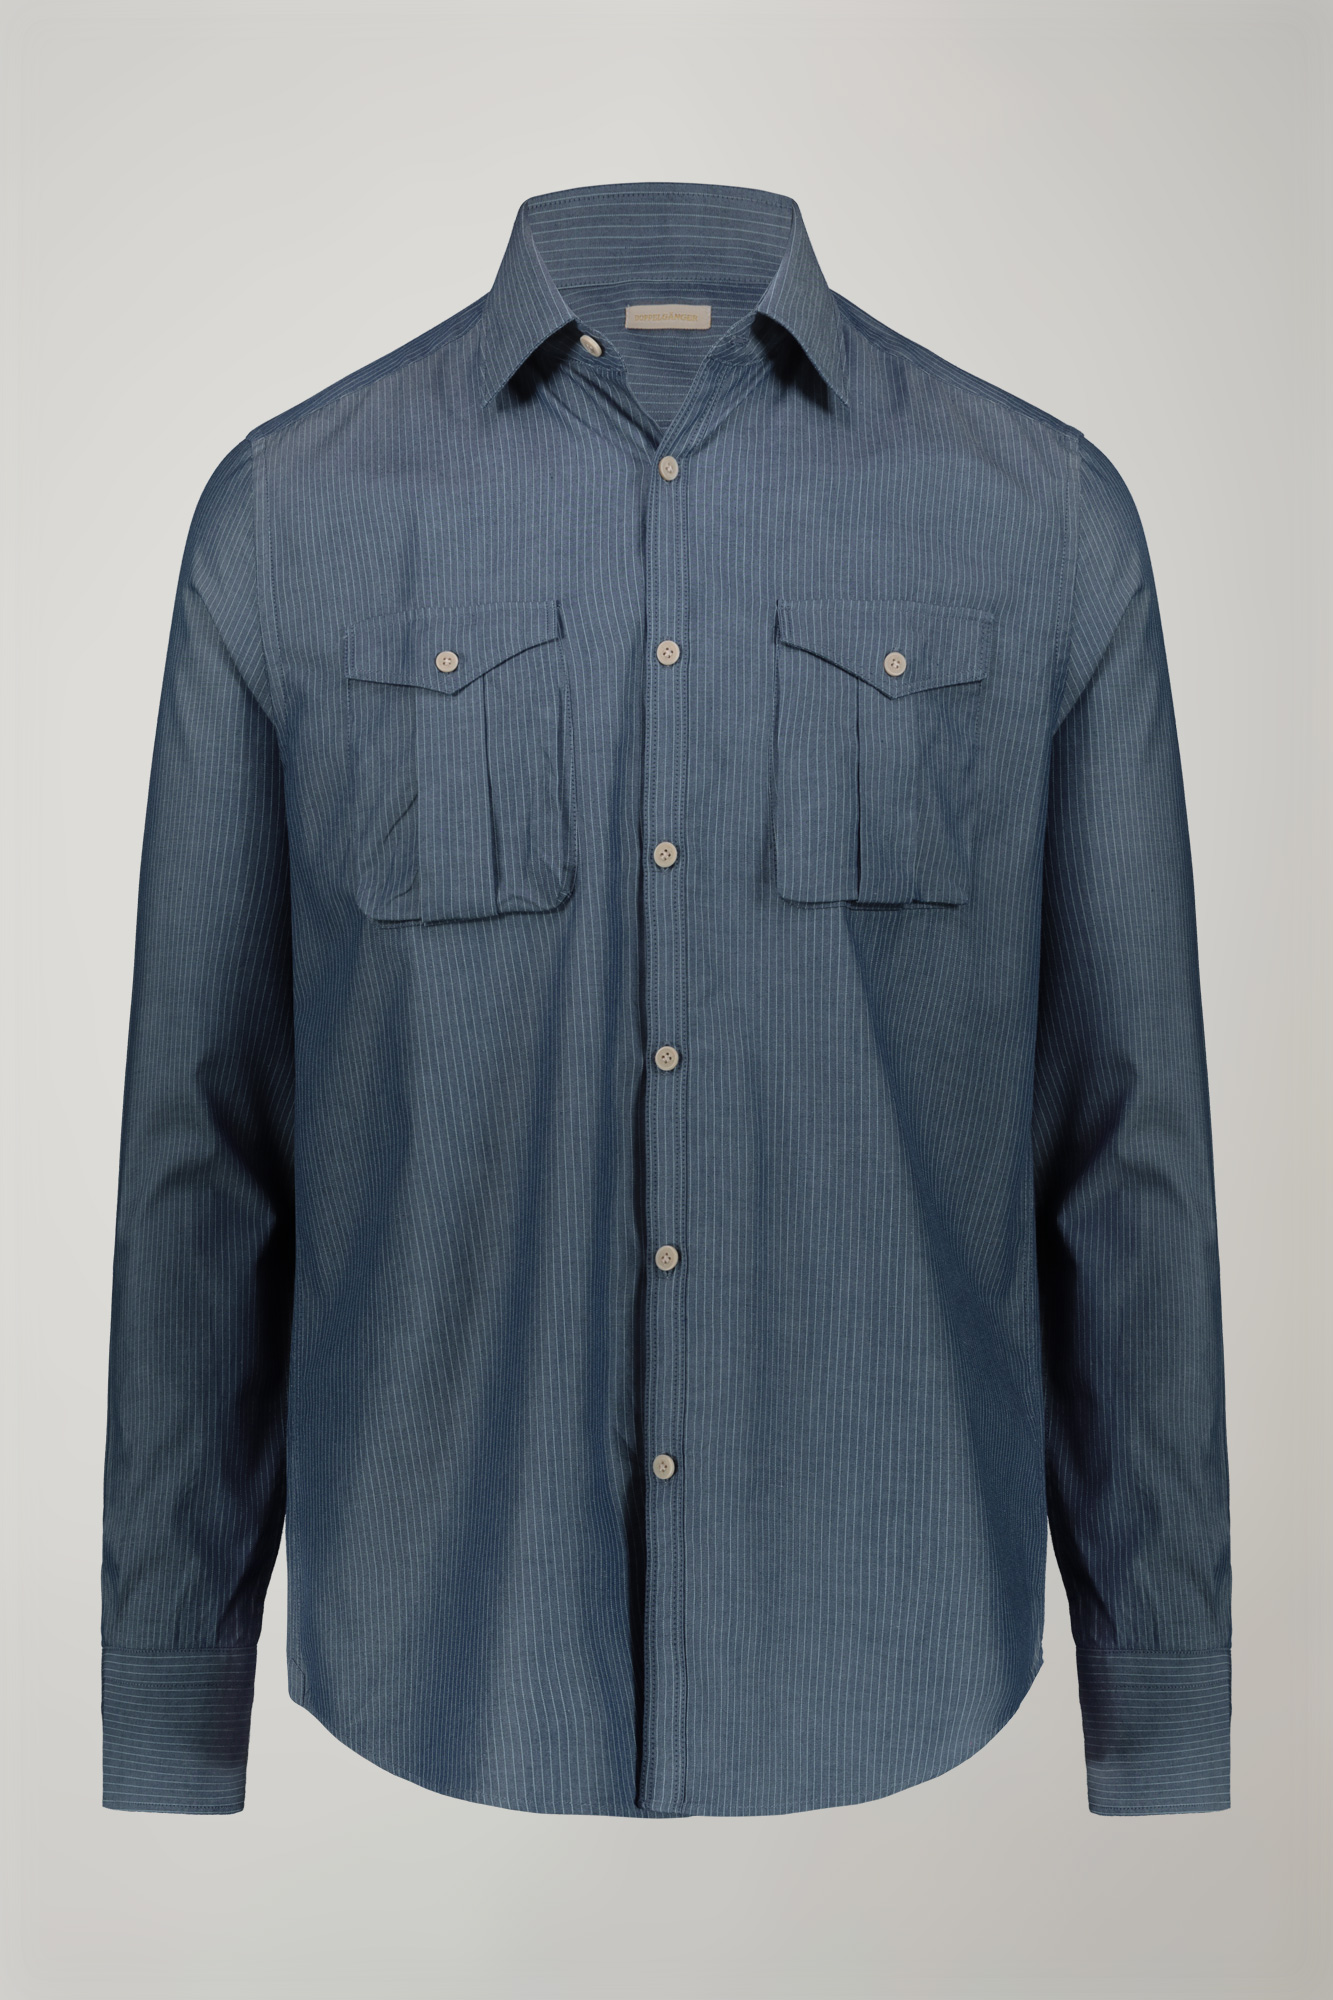 Men’s casual shirt with classic collar 100% cotton pinstriped fabric in denim comfort fit image number null